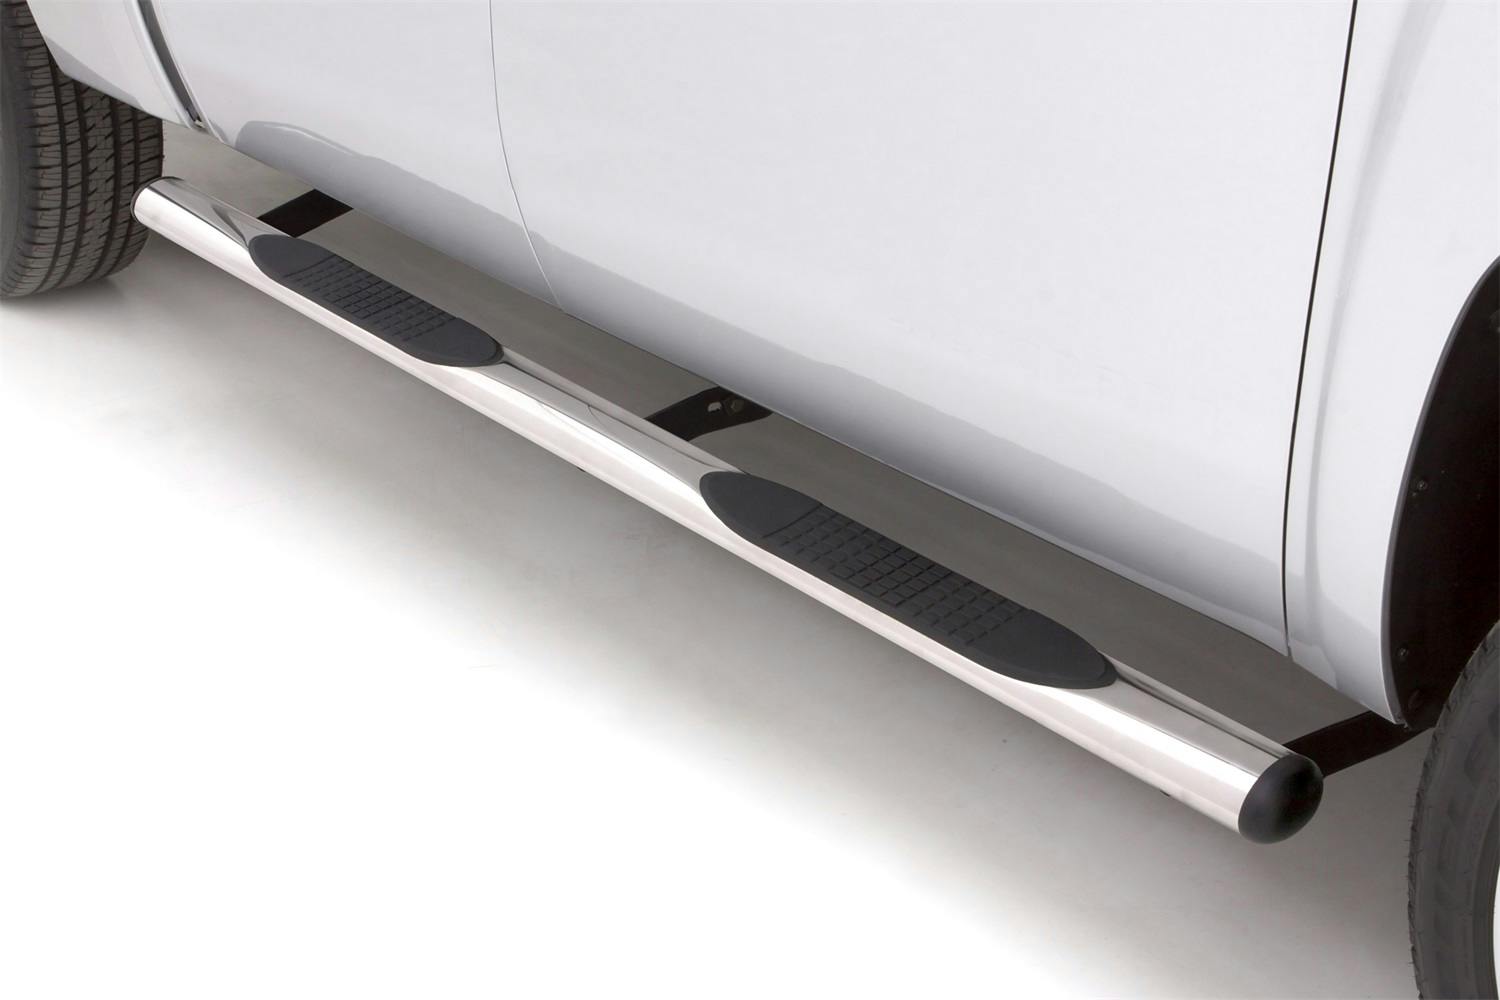 Lund 23578357 Polished Stainless Steel 4 Oval Straight Nerf Bars for 1999-2013 Silverado/Sierra 1500 Extended Cab 